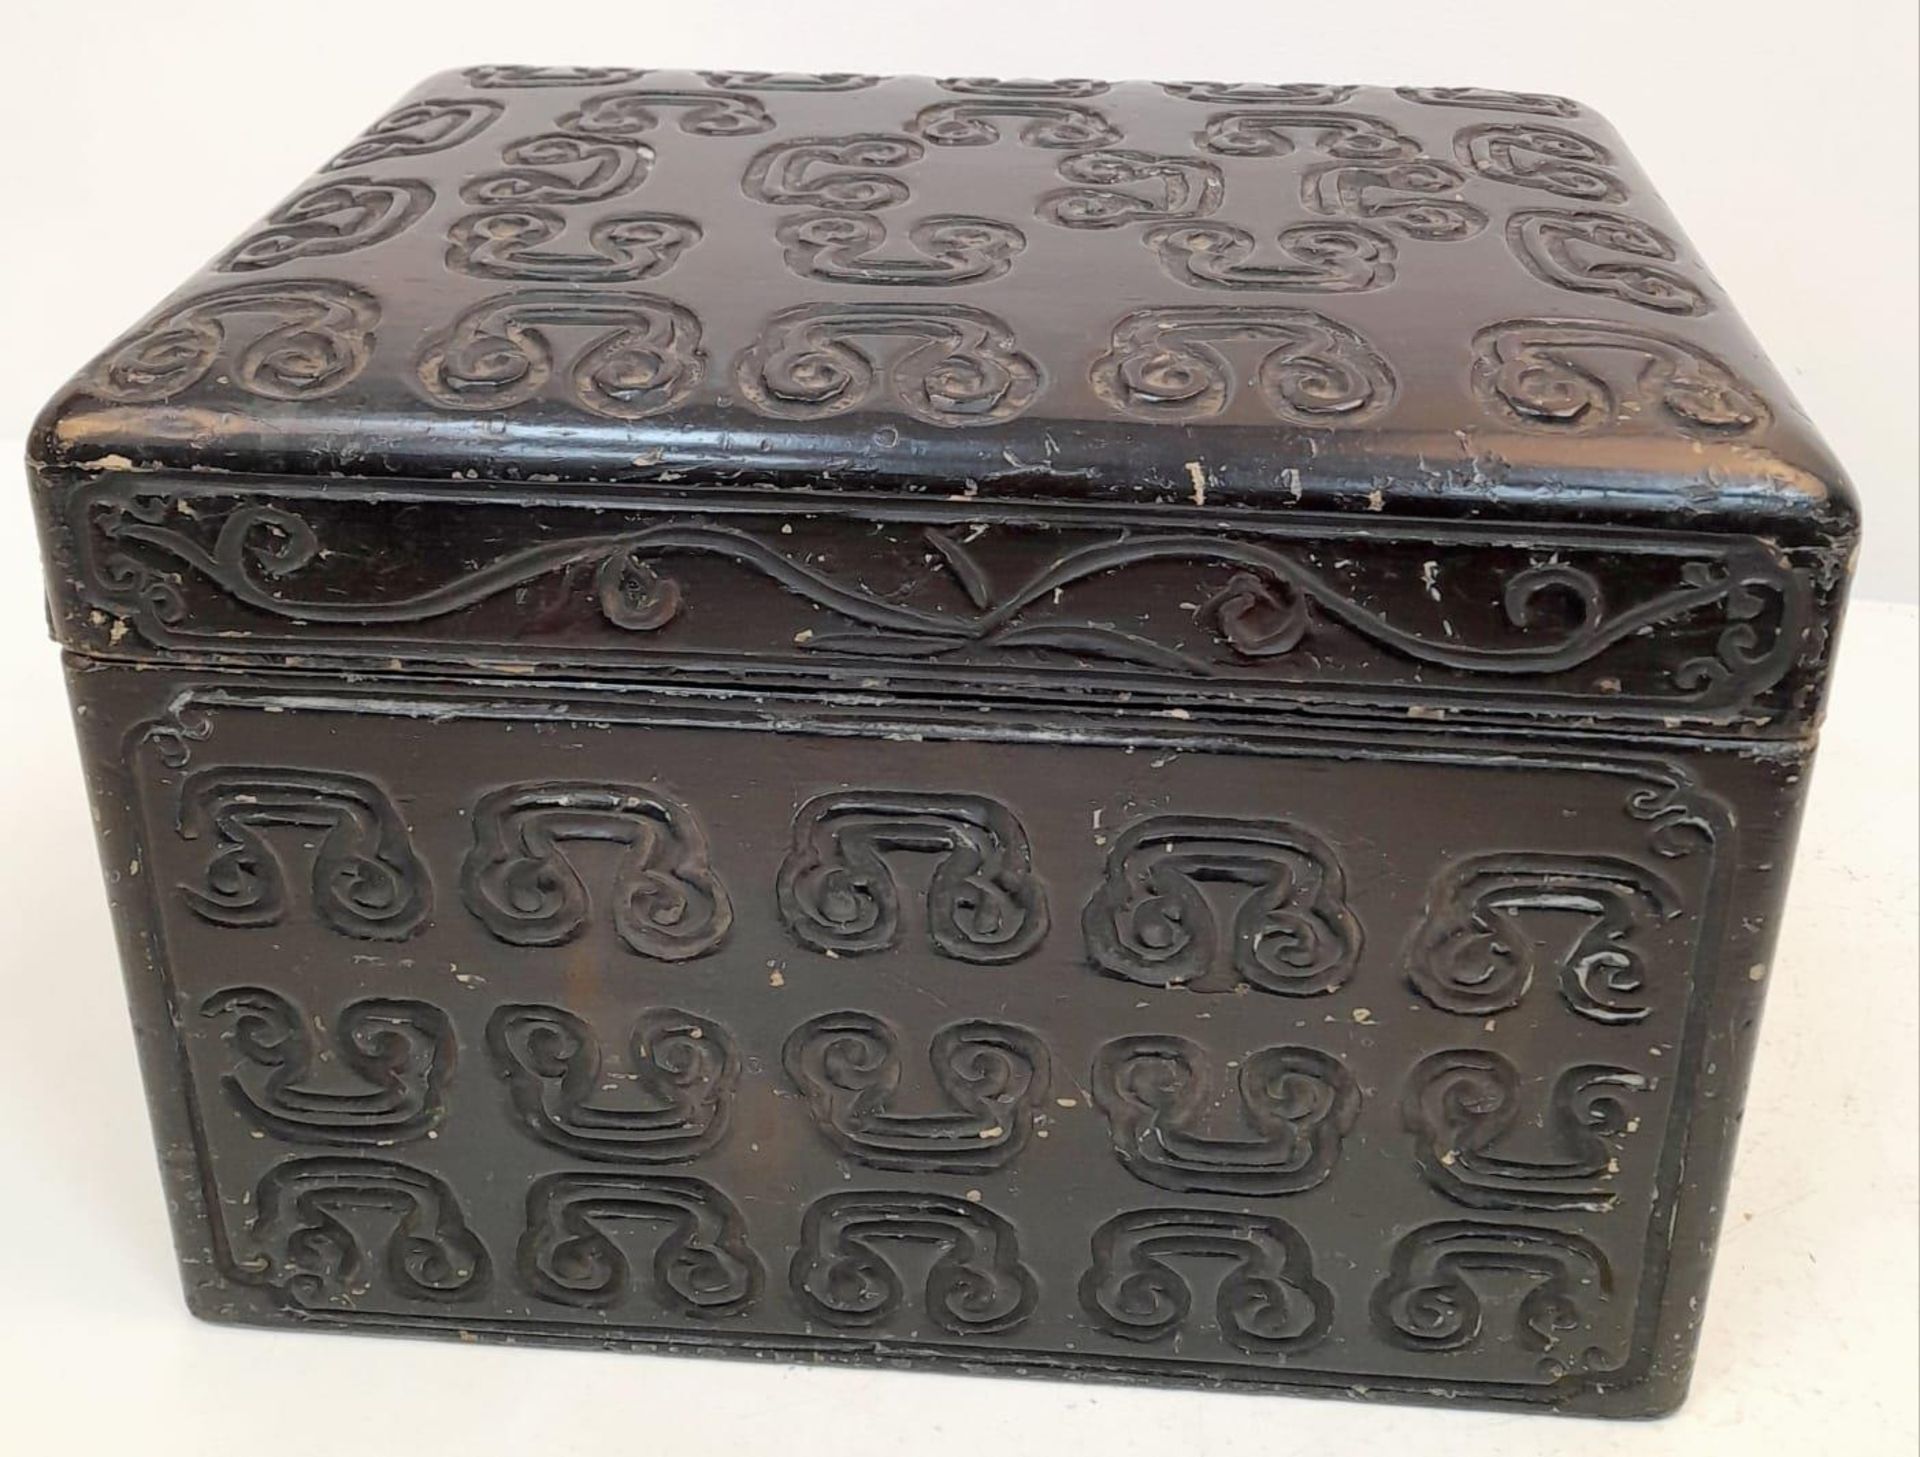 A Fascinating and Wonderful Antique Chinese Large Lacquered Box - 18th century, possibly earlier. - Image 2 of 7